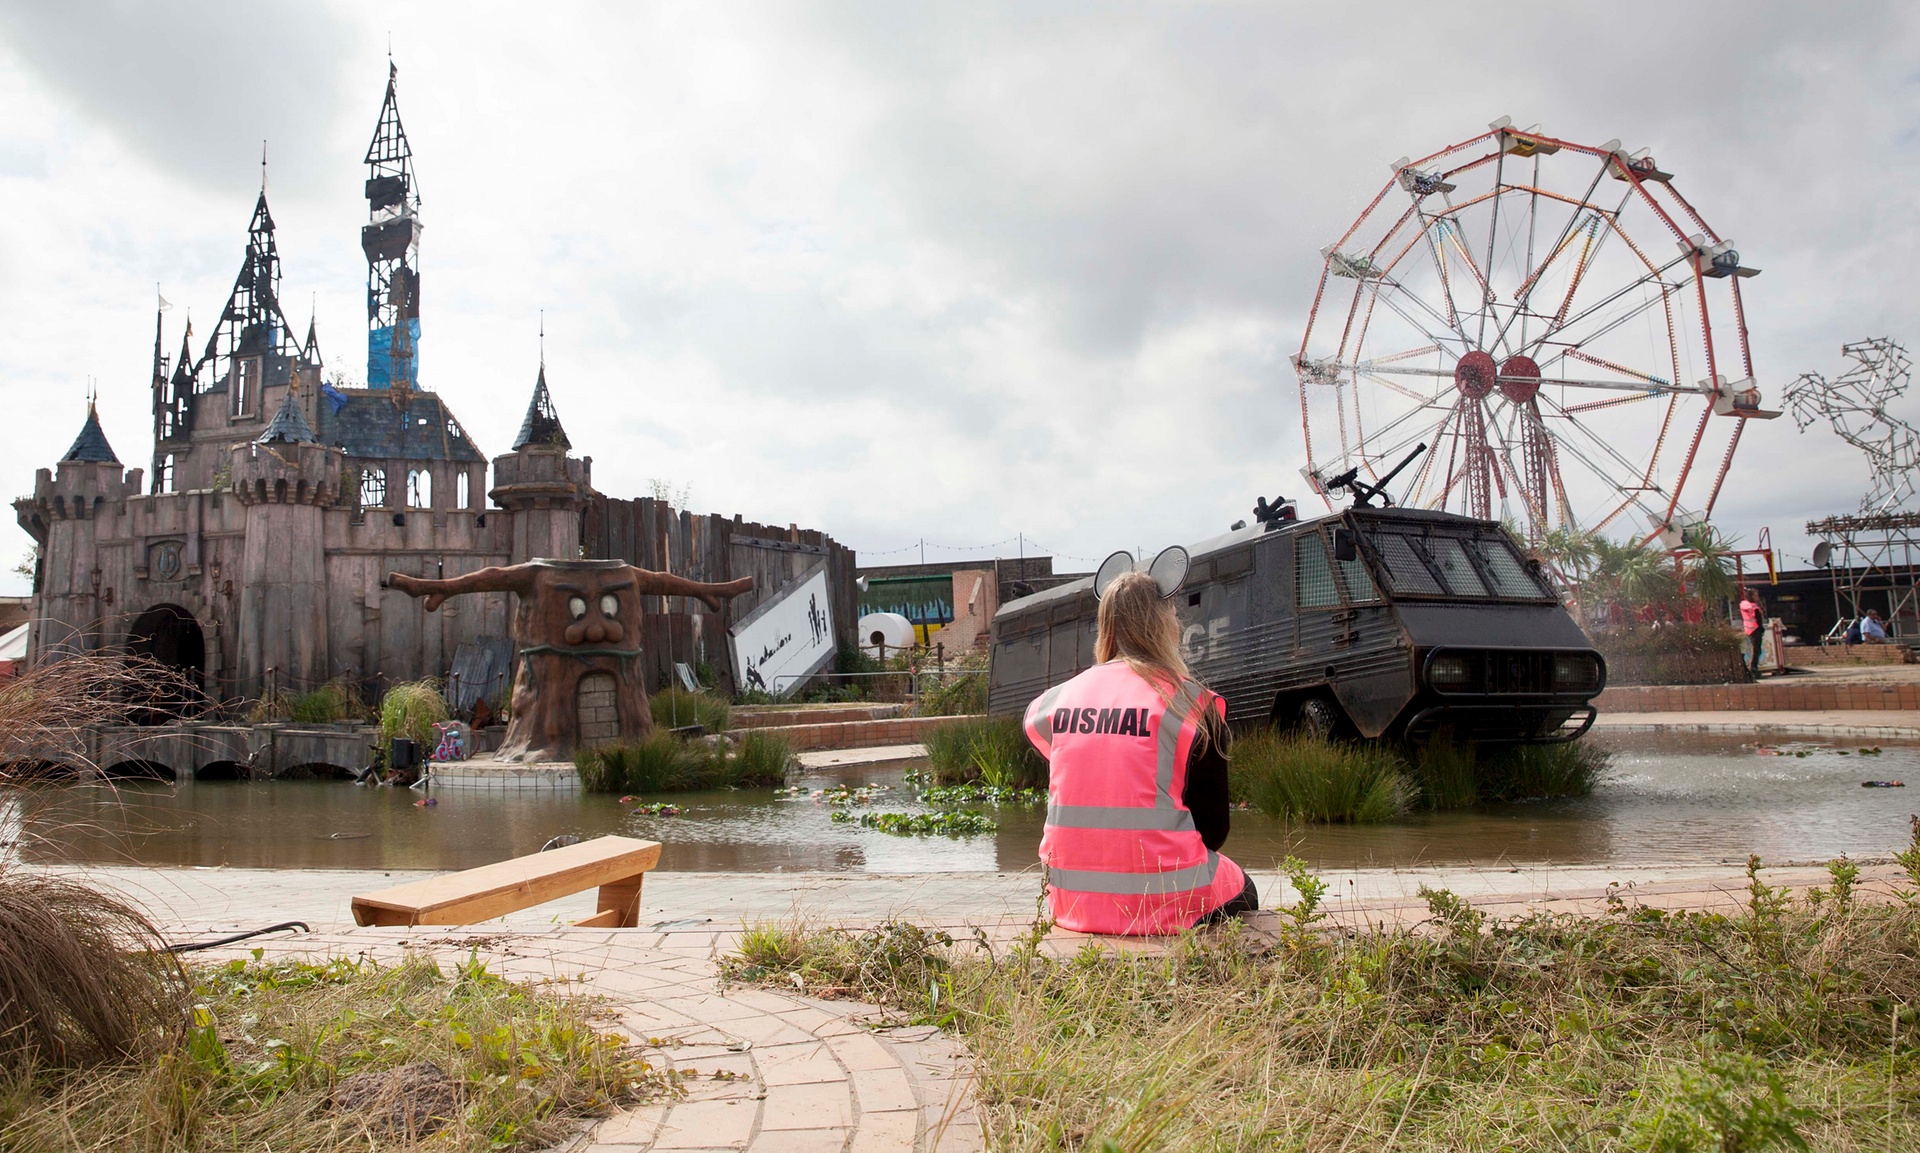 Parts of the dismantled "bemusement park" Dismaland to be shipped to the Calais camp, the "Jungle", to shelter migrants. Credit: Alicia Canter